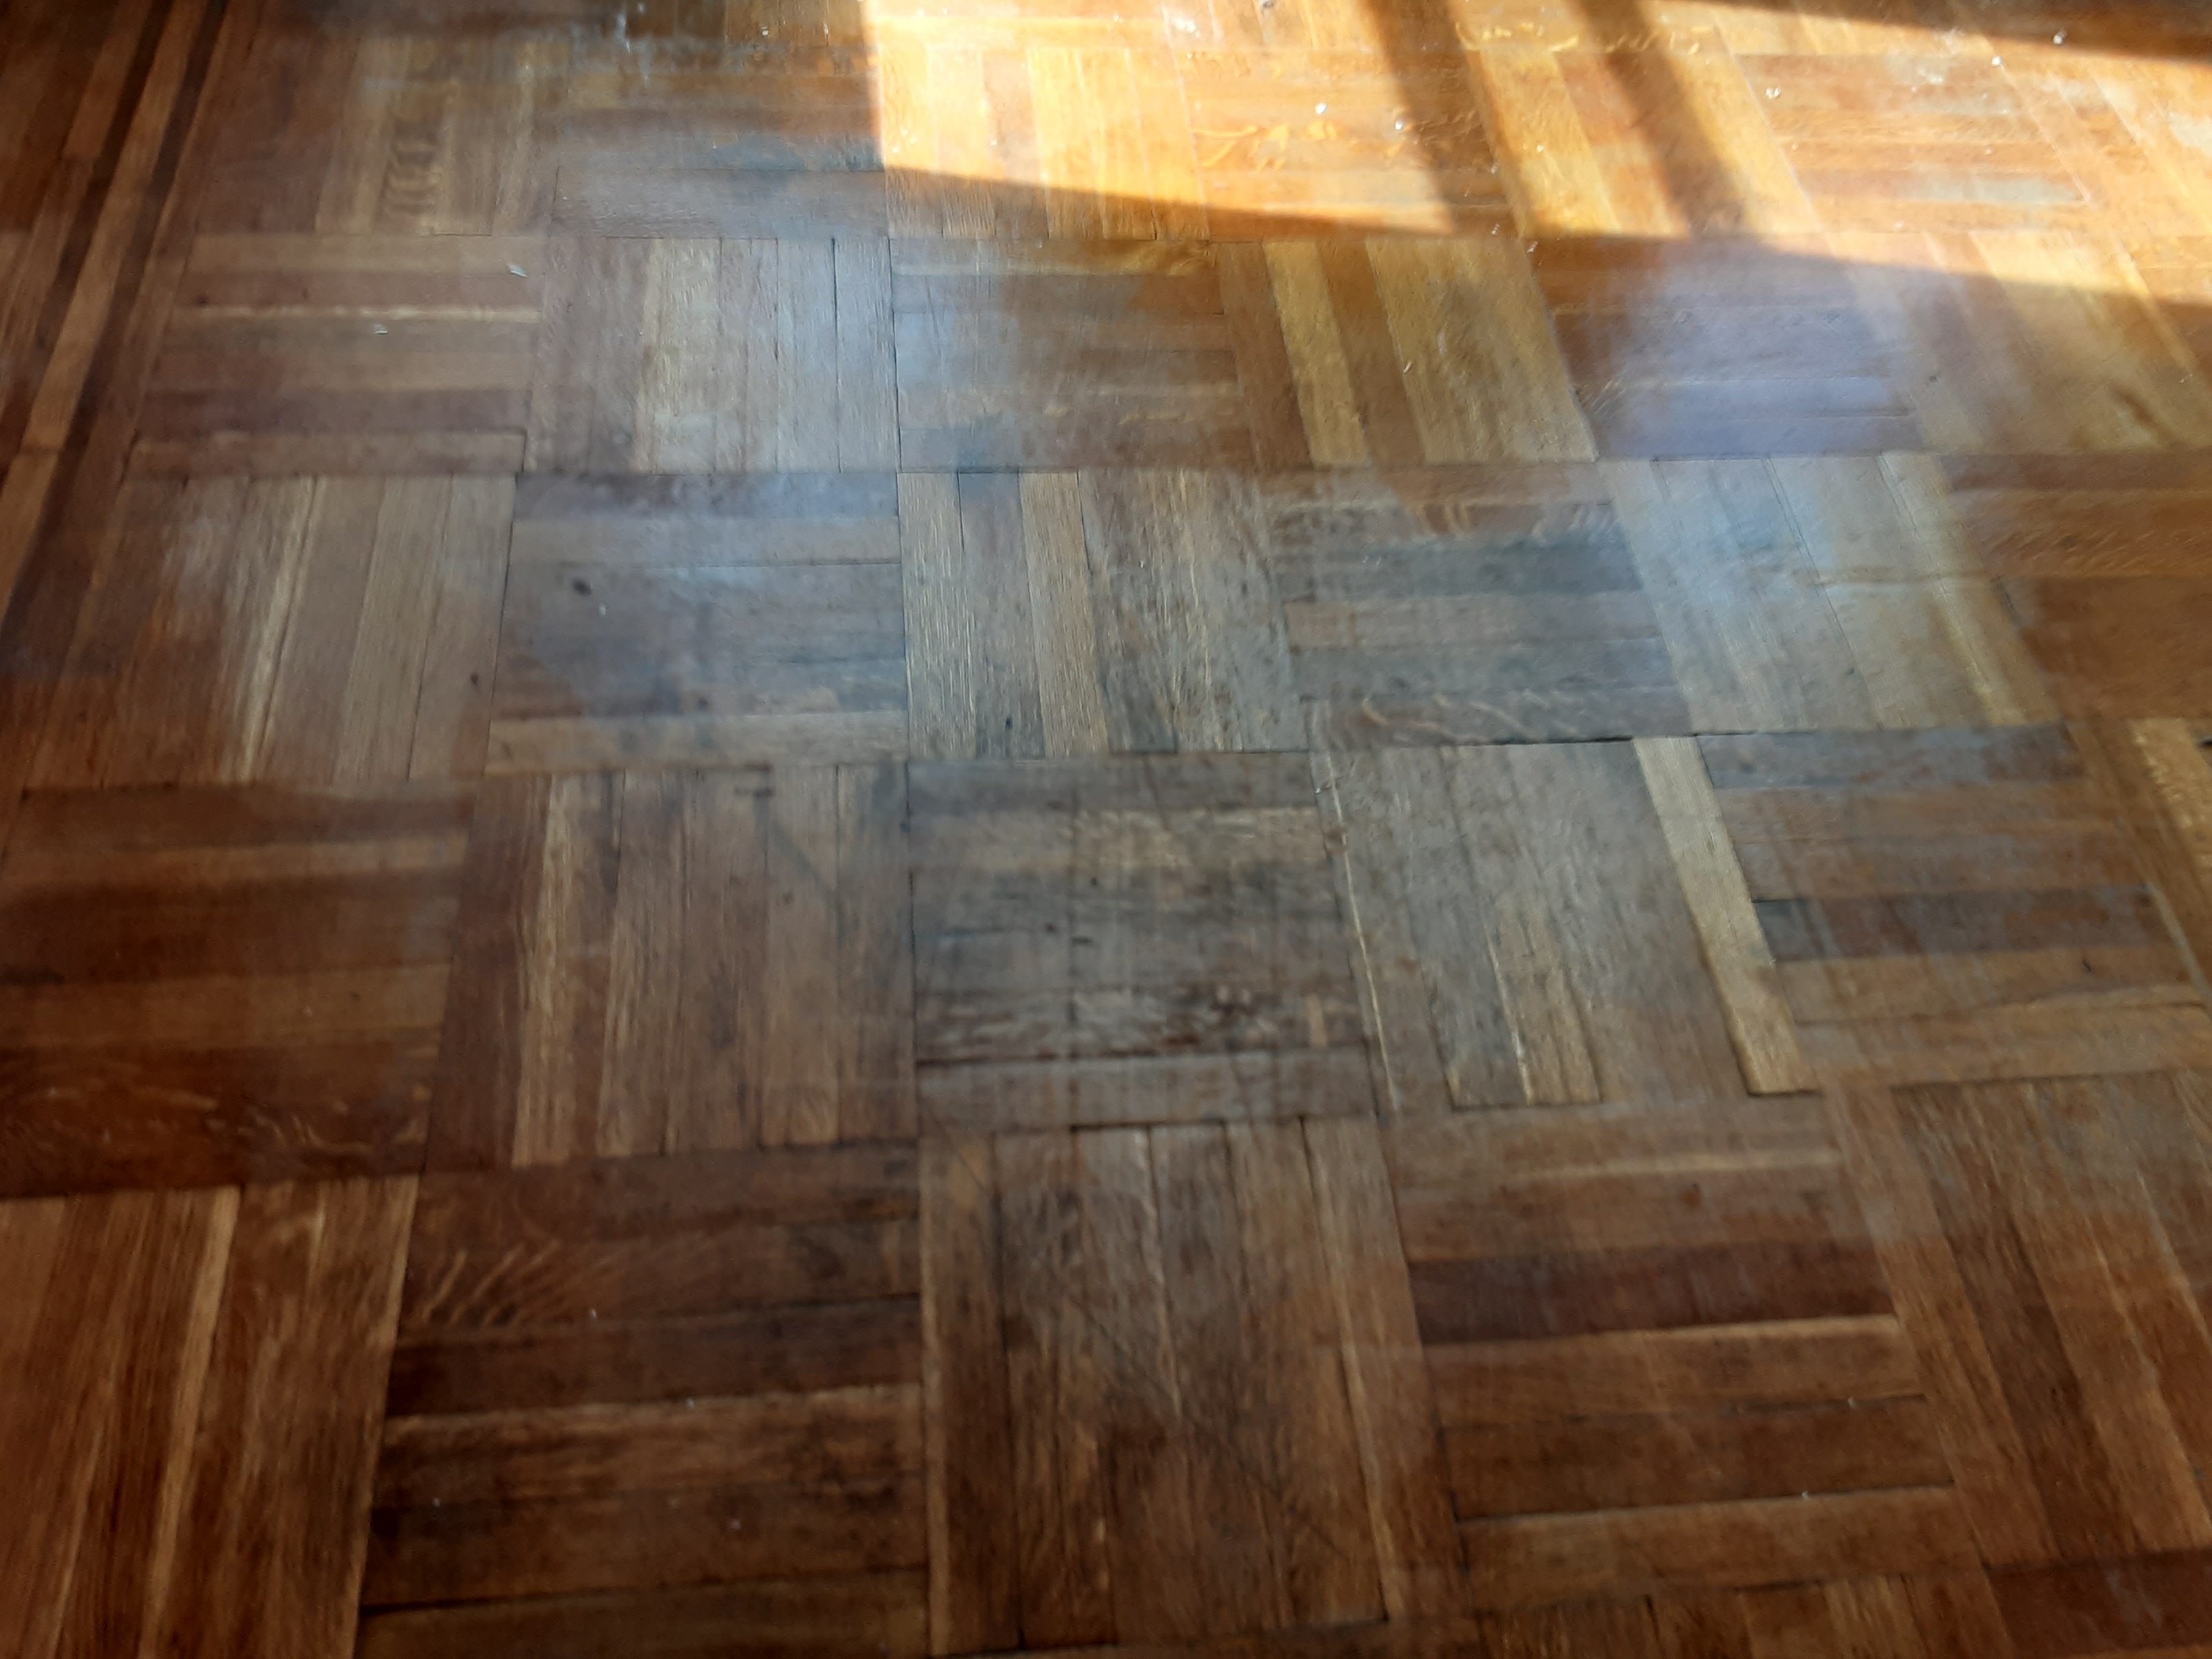 worn and rough wood floors